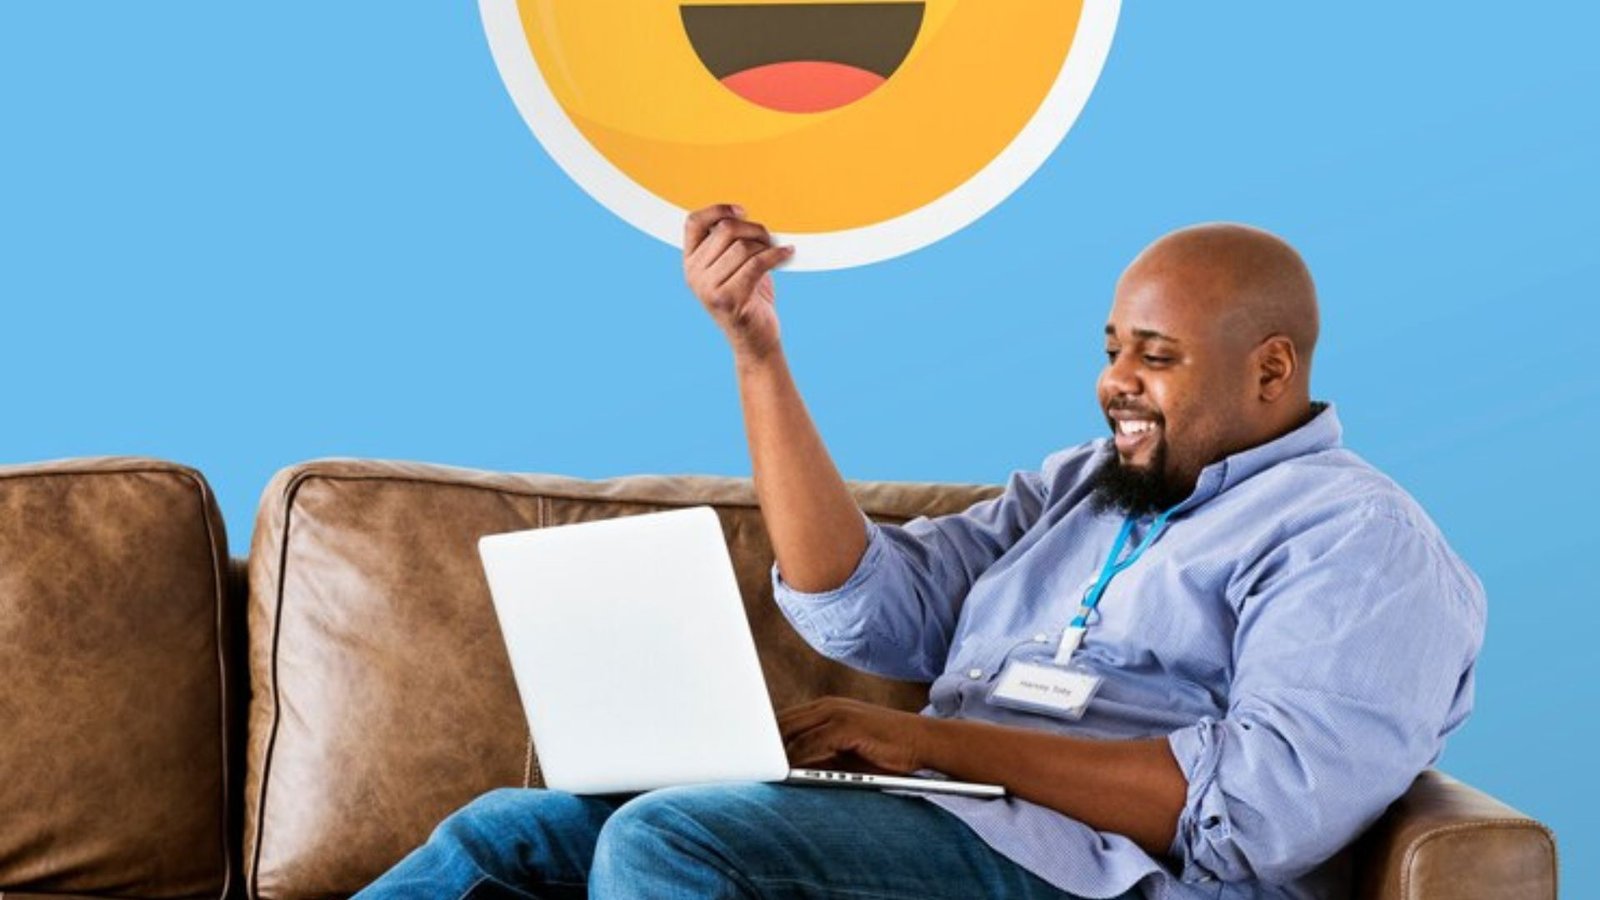 man showing heart eyes emoticon on couch with laptop on his lap